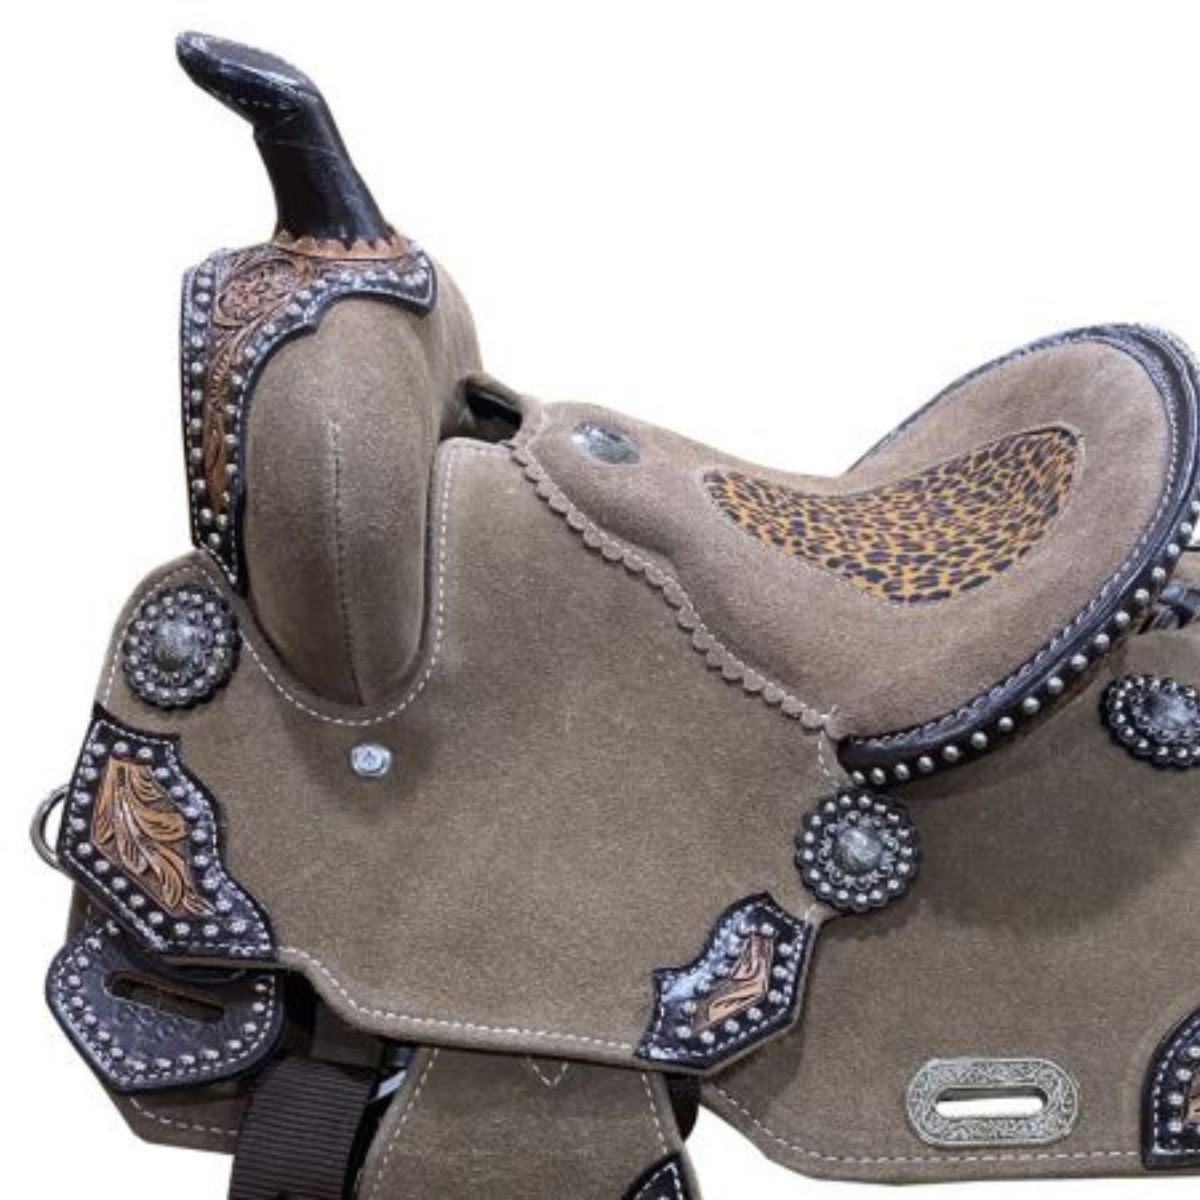 12" DOUBLE T ROUGH OUT BARREL STYLE SADDLE WITH CHEETAH PRINTED INLAY - Double T Saddles